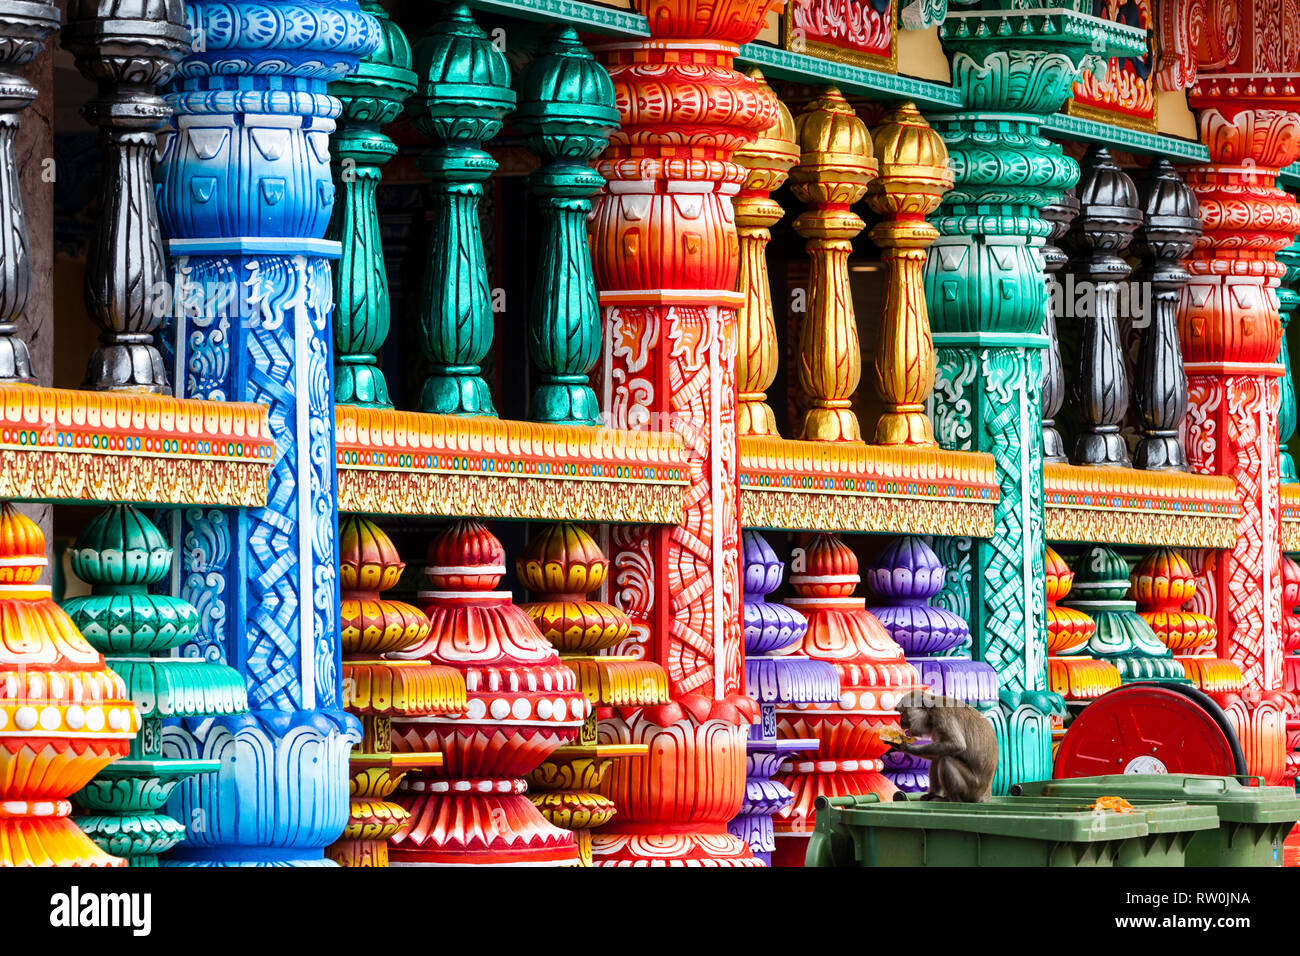 Batu Caves, Columns of Hindu Temple at Base of Stairs Leading to Caves, Selangor, Malaysia. Stock Photo